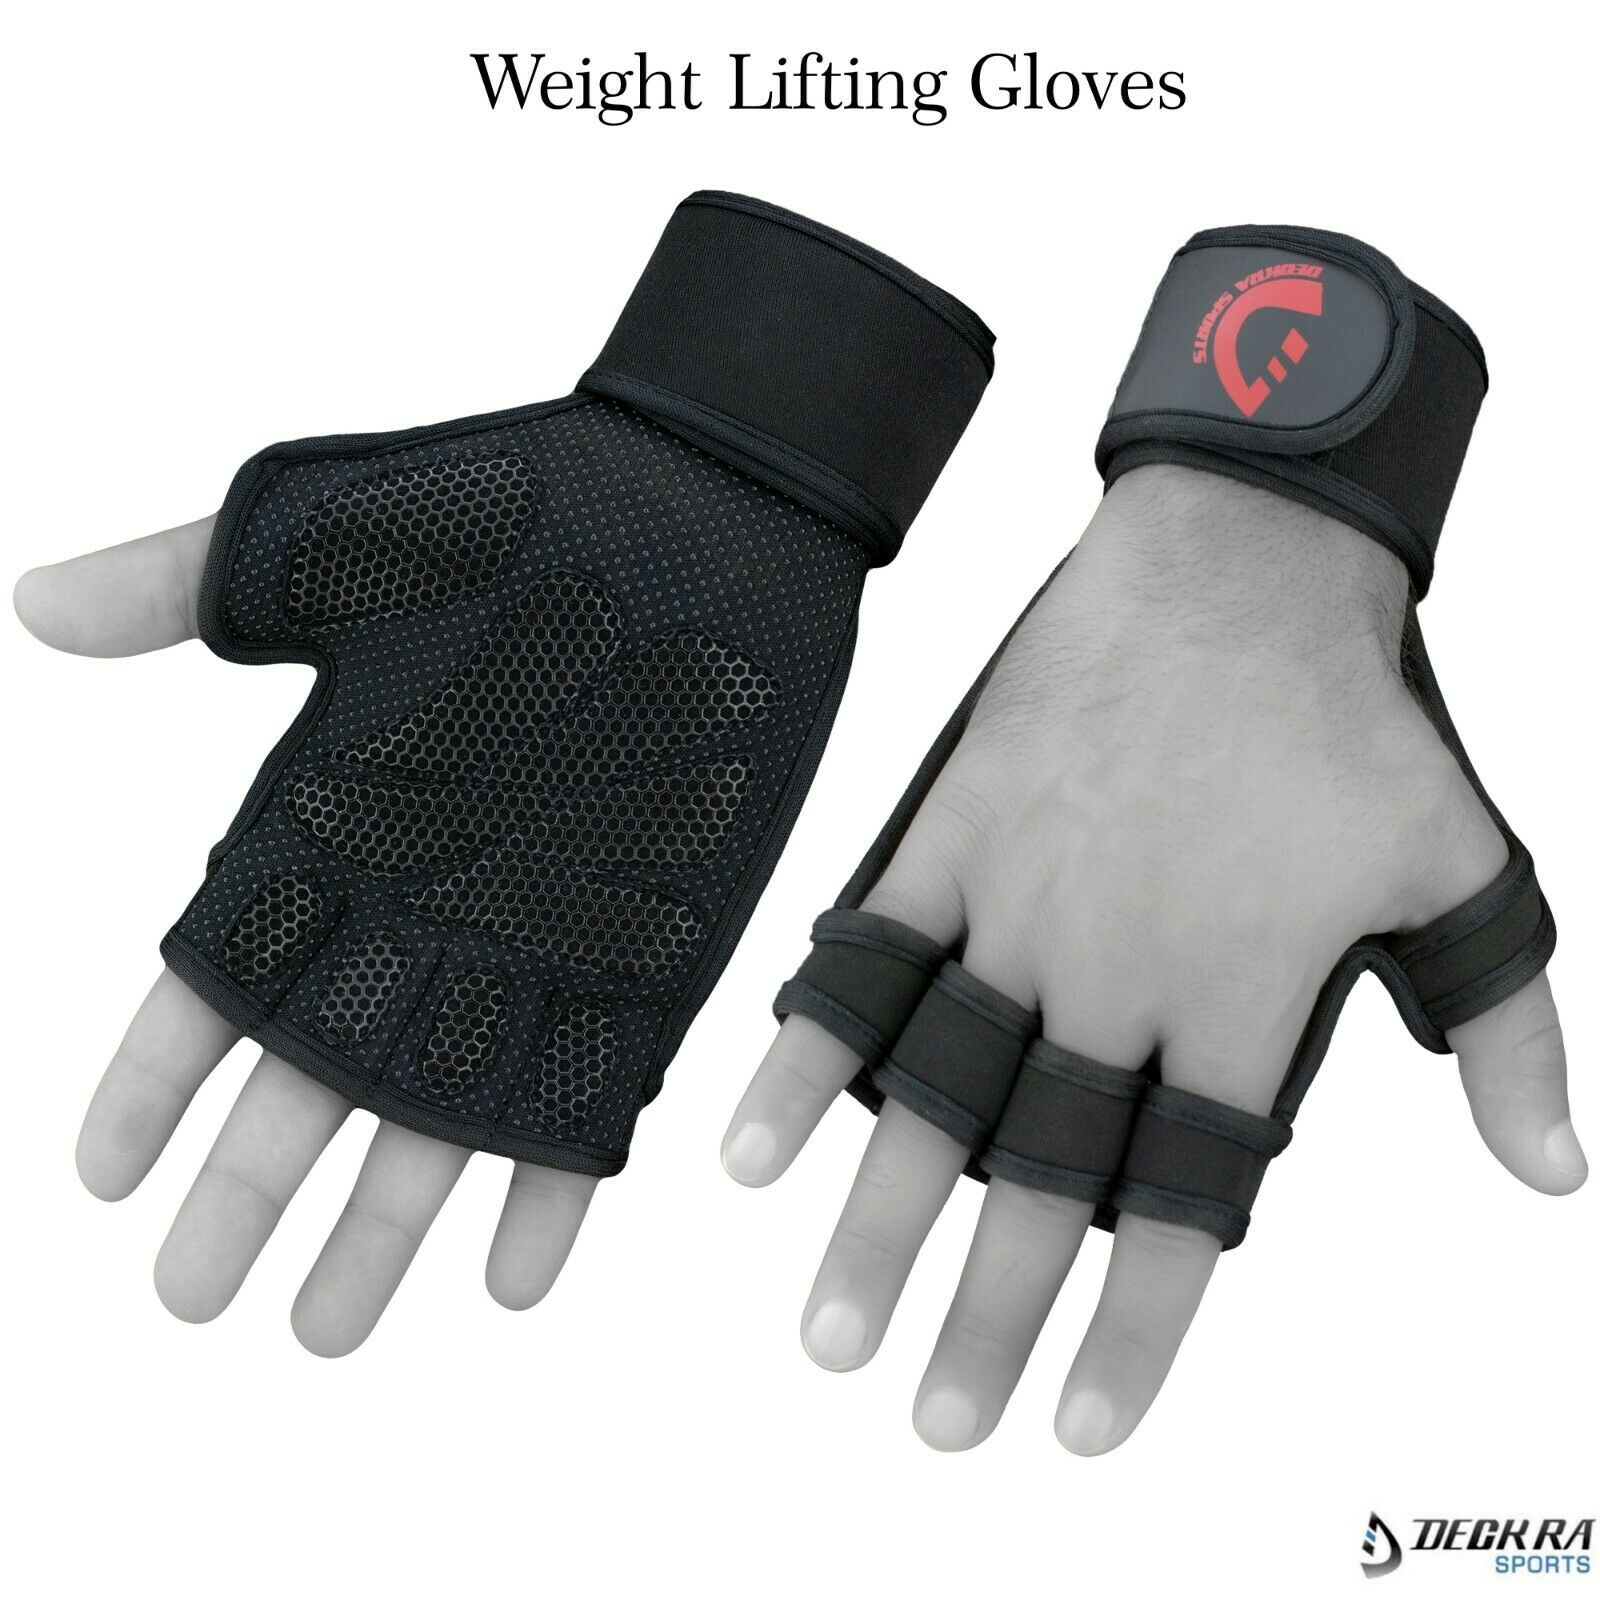 Deckra Sports Weight Lifting Gloves Workout Gym Cross Training Pull Ups Mittens